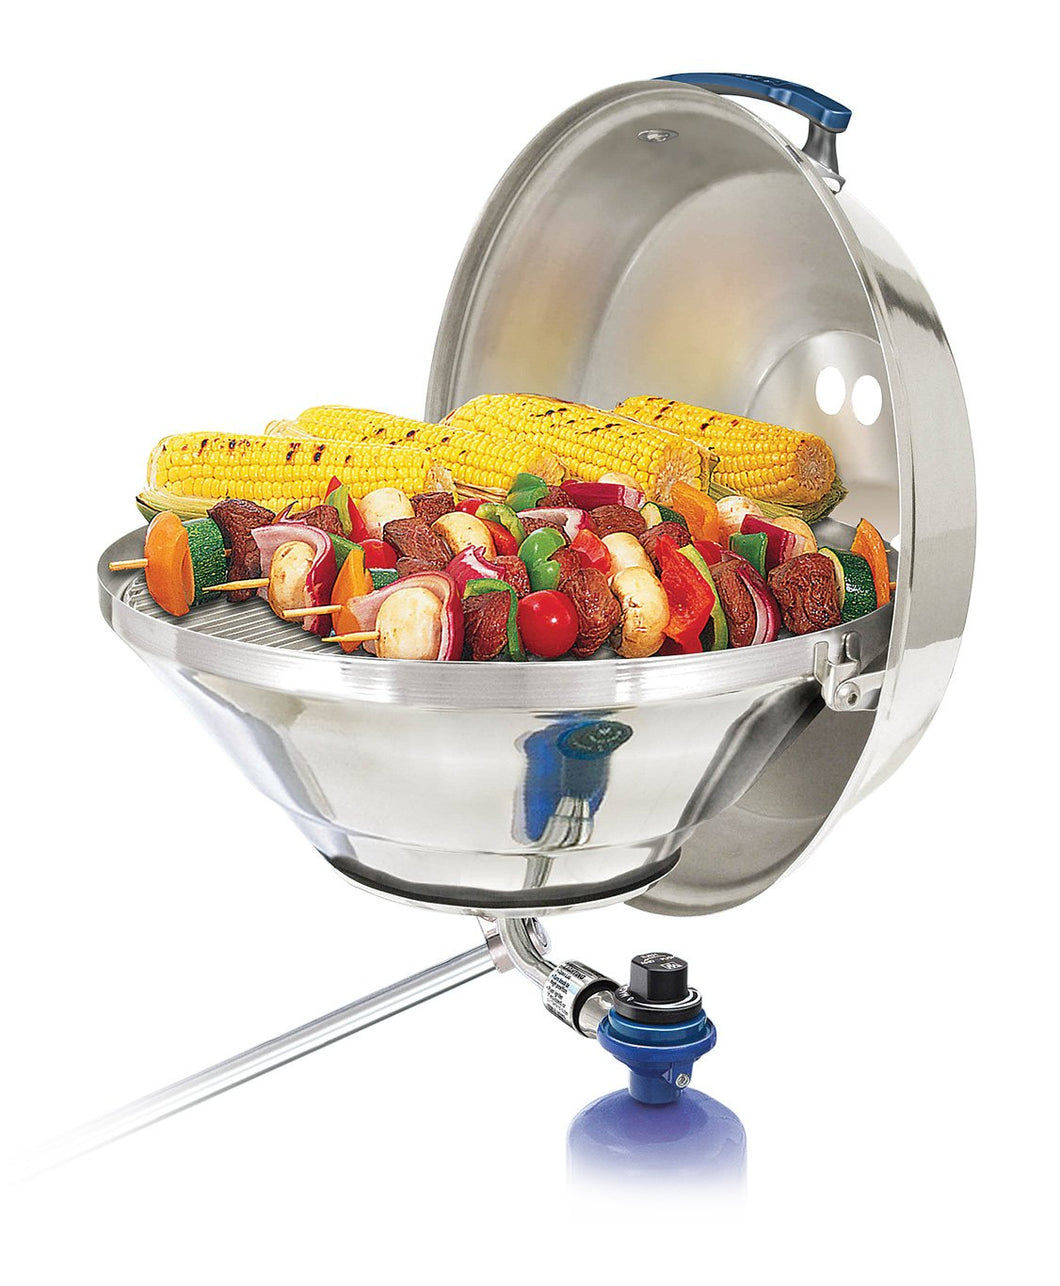 Party size marine Kettle grill rail mounted with grilled skewers and corn